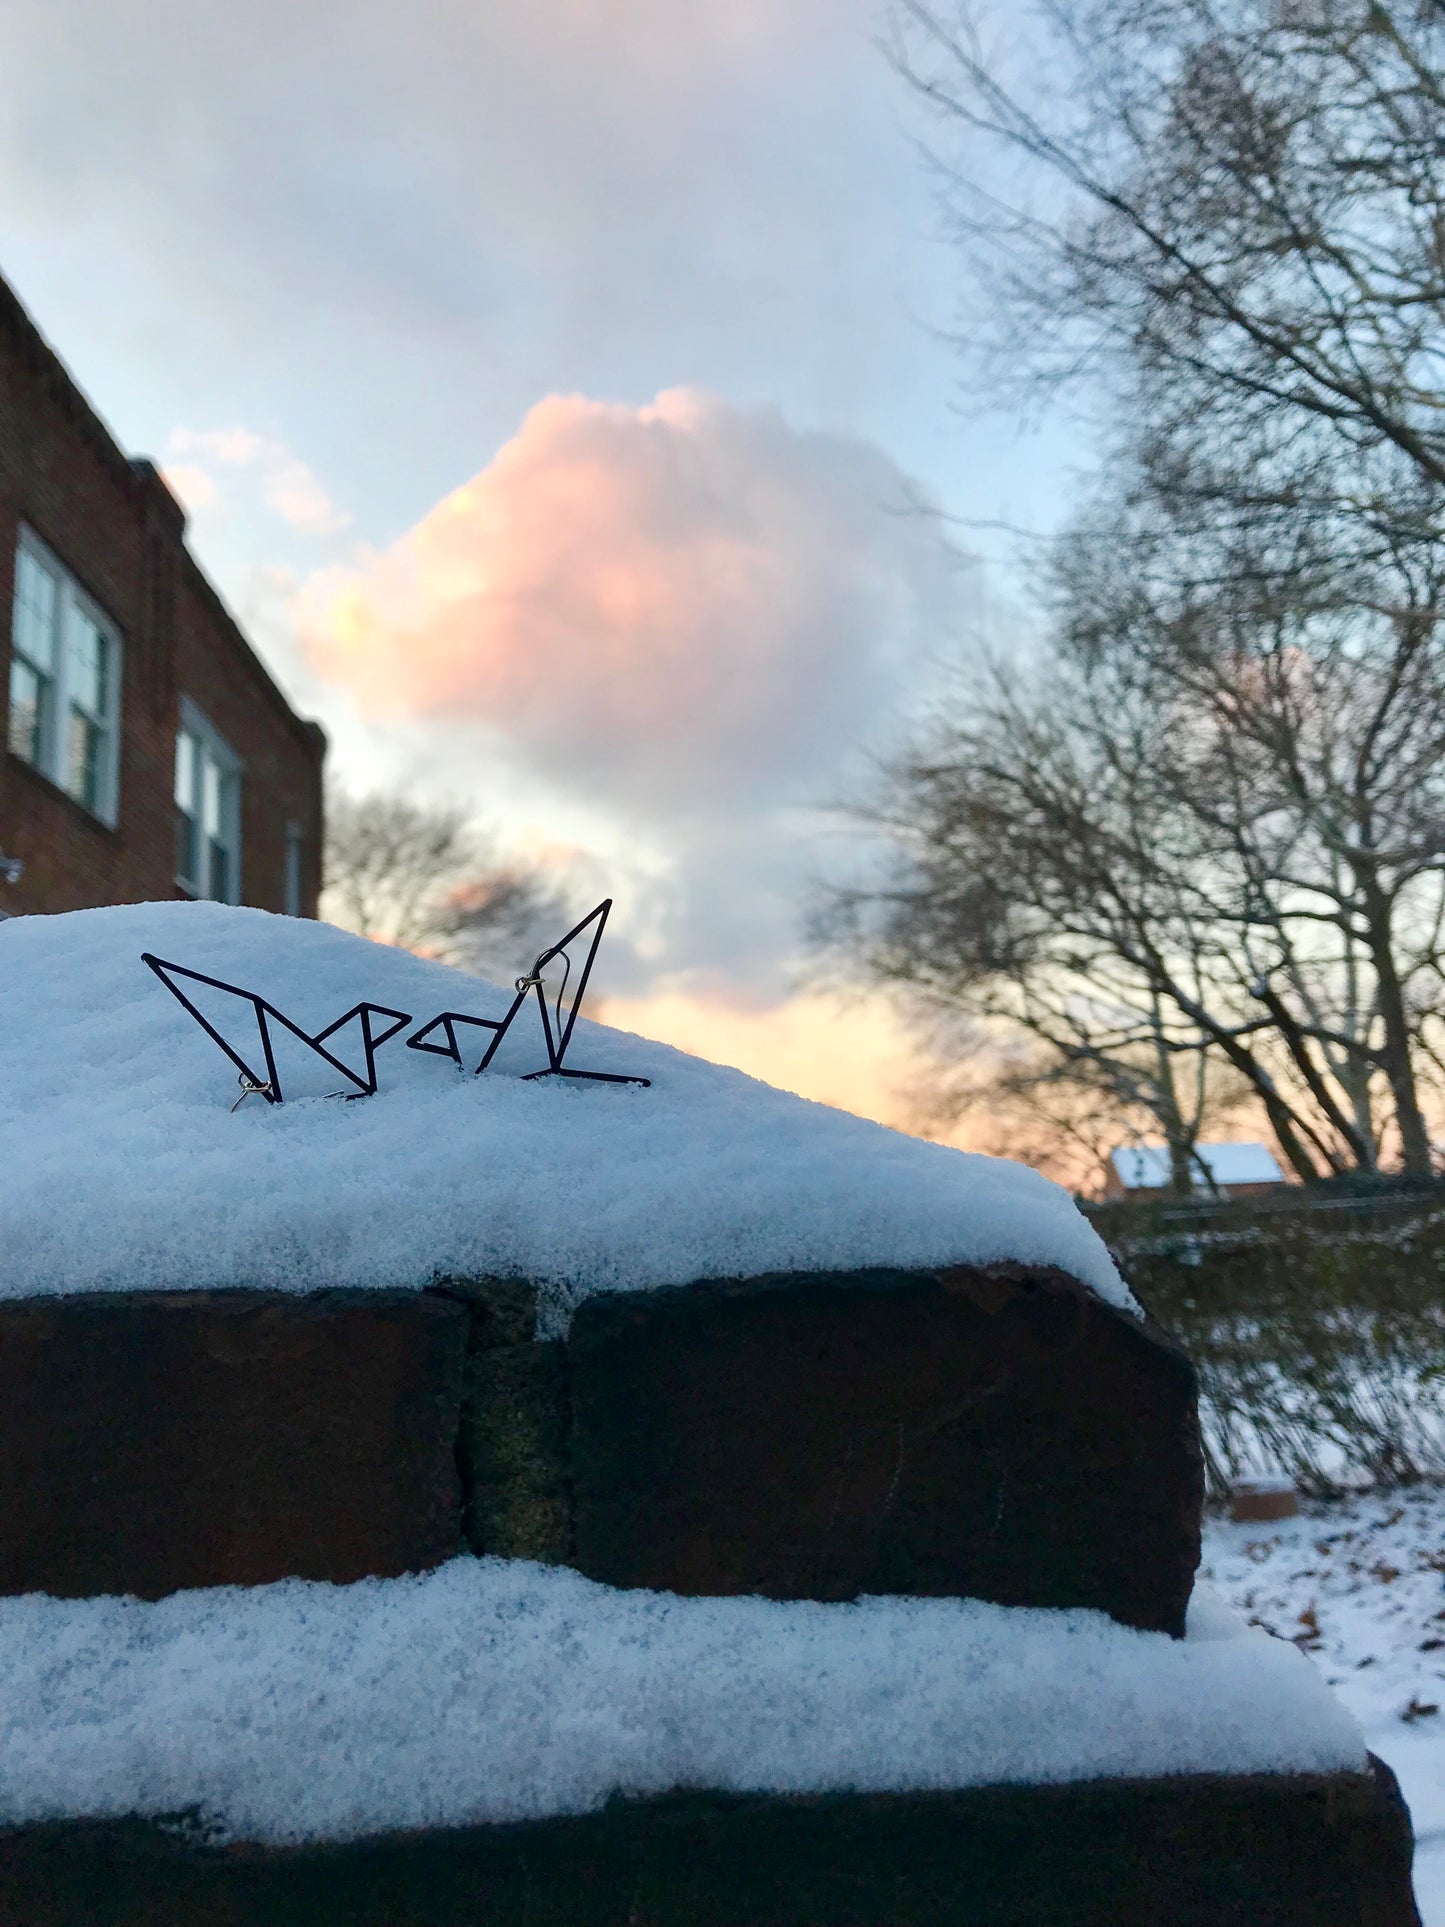 There is a fresh snowfall with barren trees and brick houses in the background. The sky is a bright blue with a cloud reflecting pinks and yellows of a setting sun. In a pile of snow are two geometric bird earrings from R+D they are black and peaking out of the pile as though they had just landed on that spot.